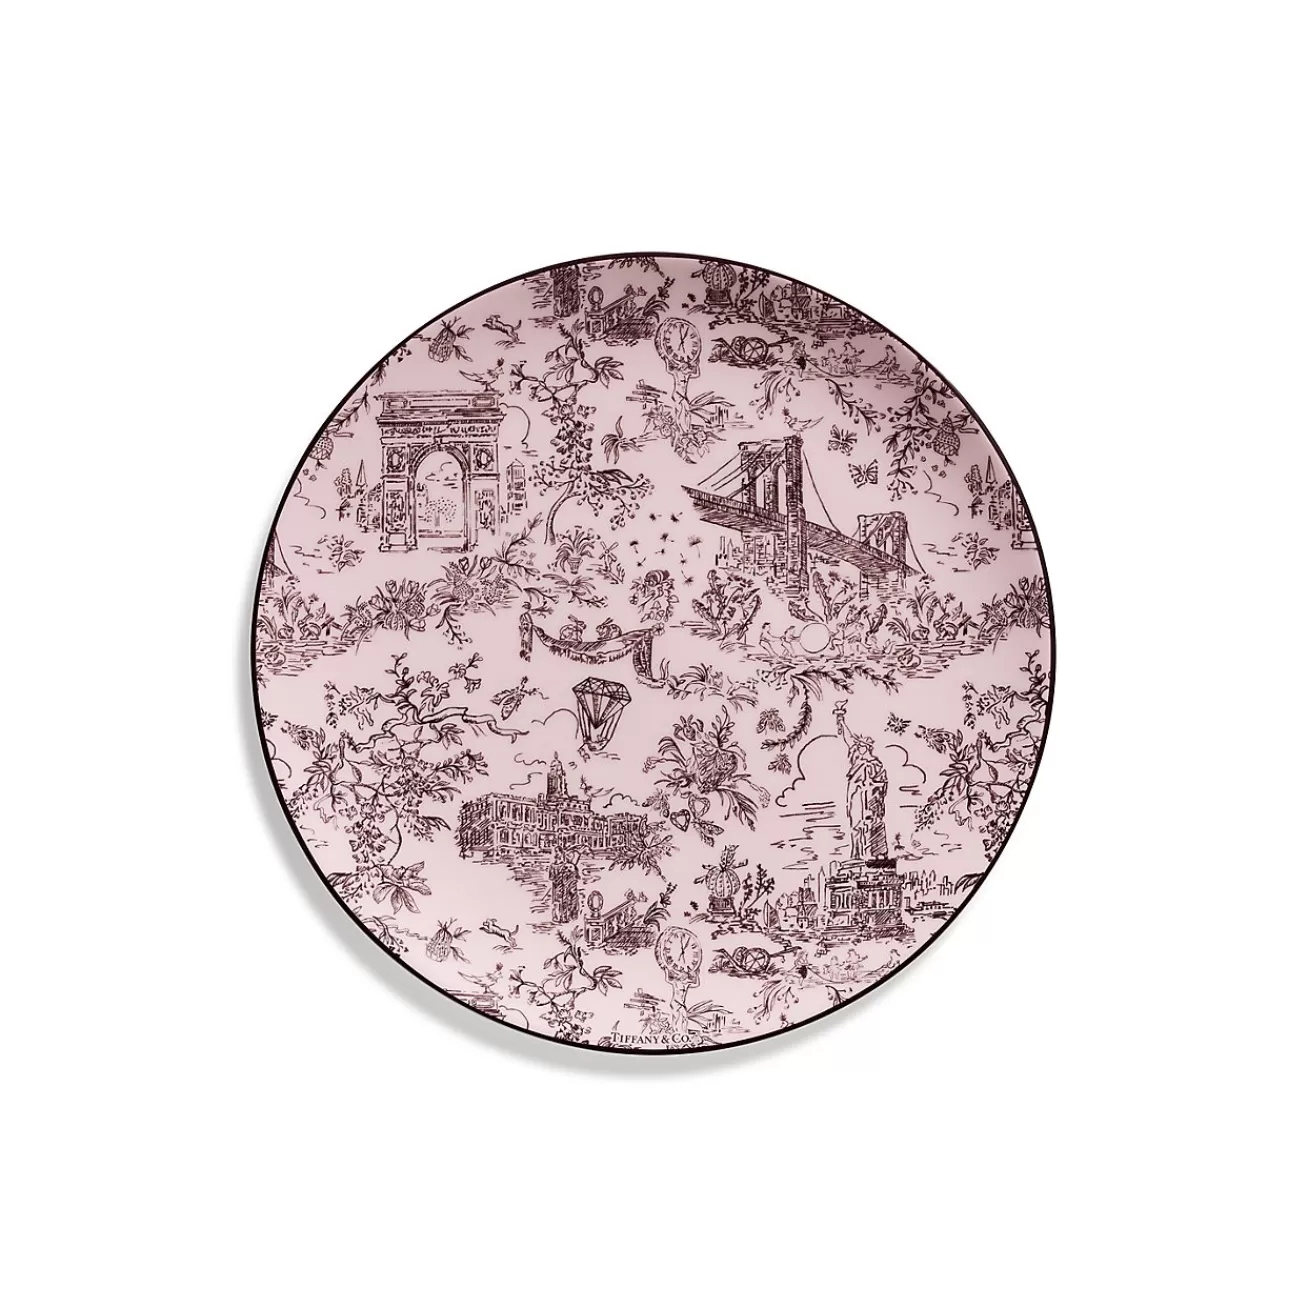 Tiffany & Co. Tiffany Toile Dessert Plate in Morganite Bone China | ^ The Couple | Business Gifts